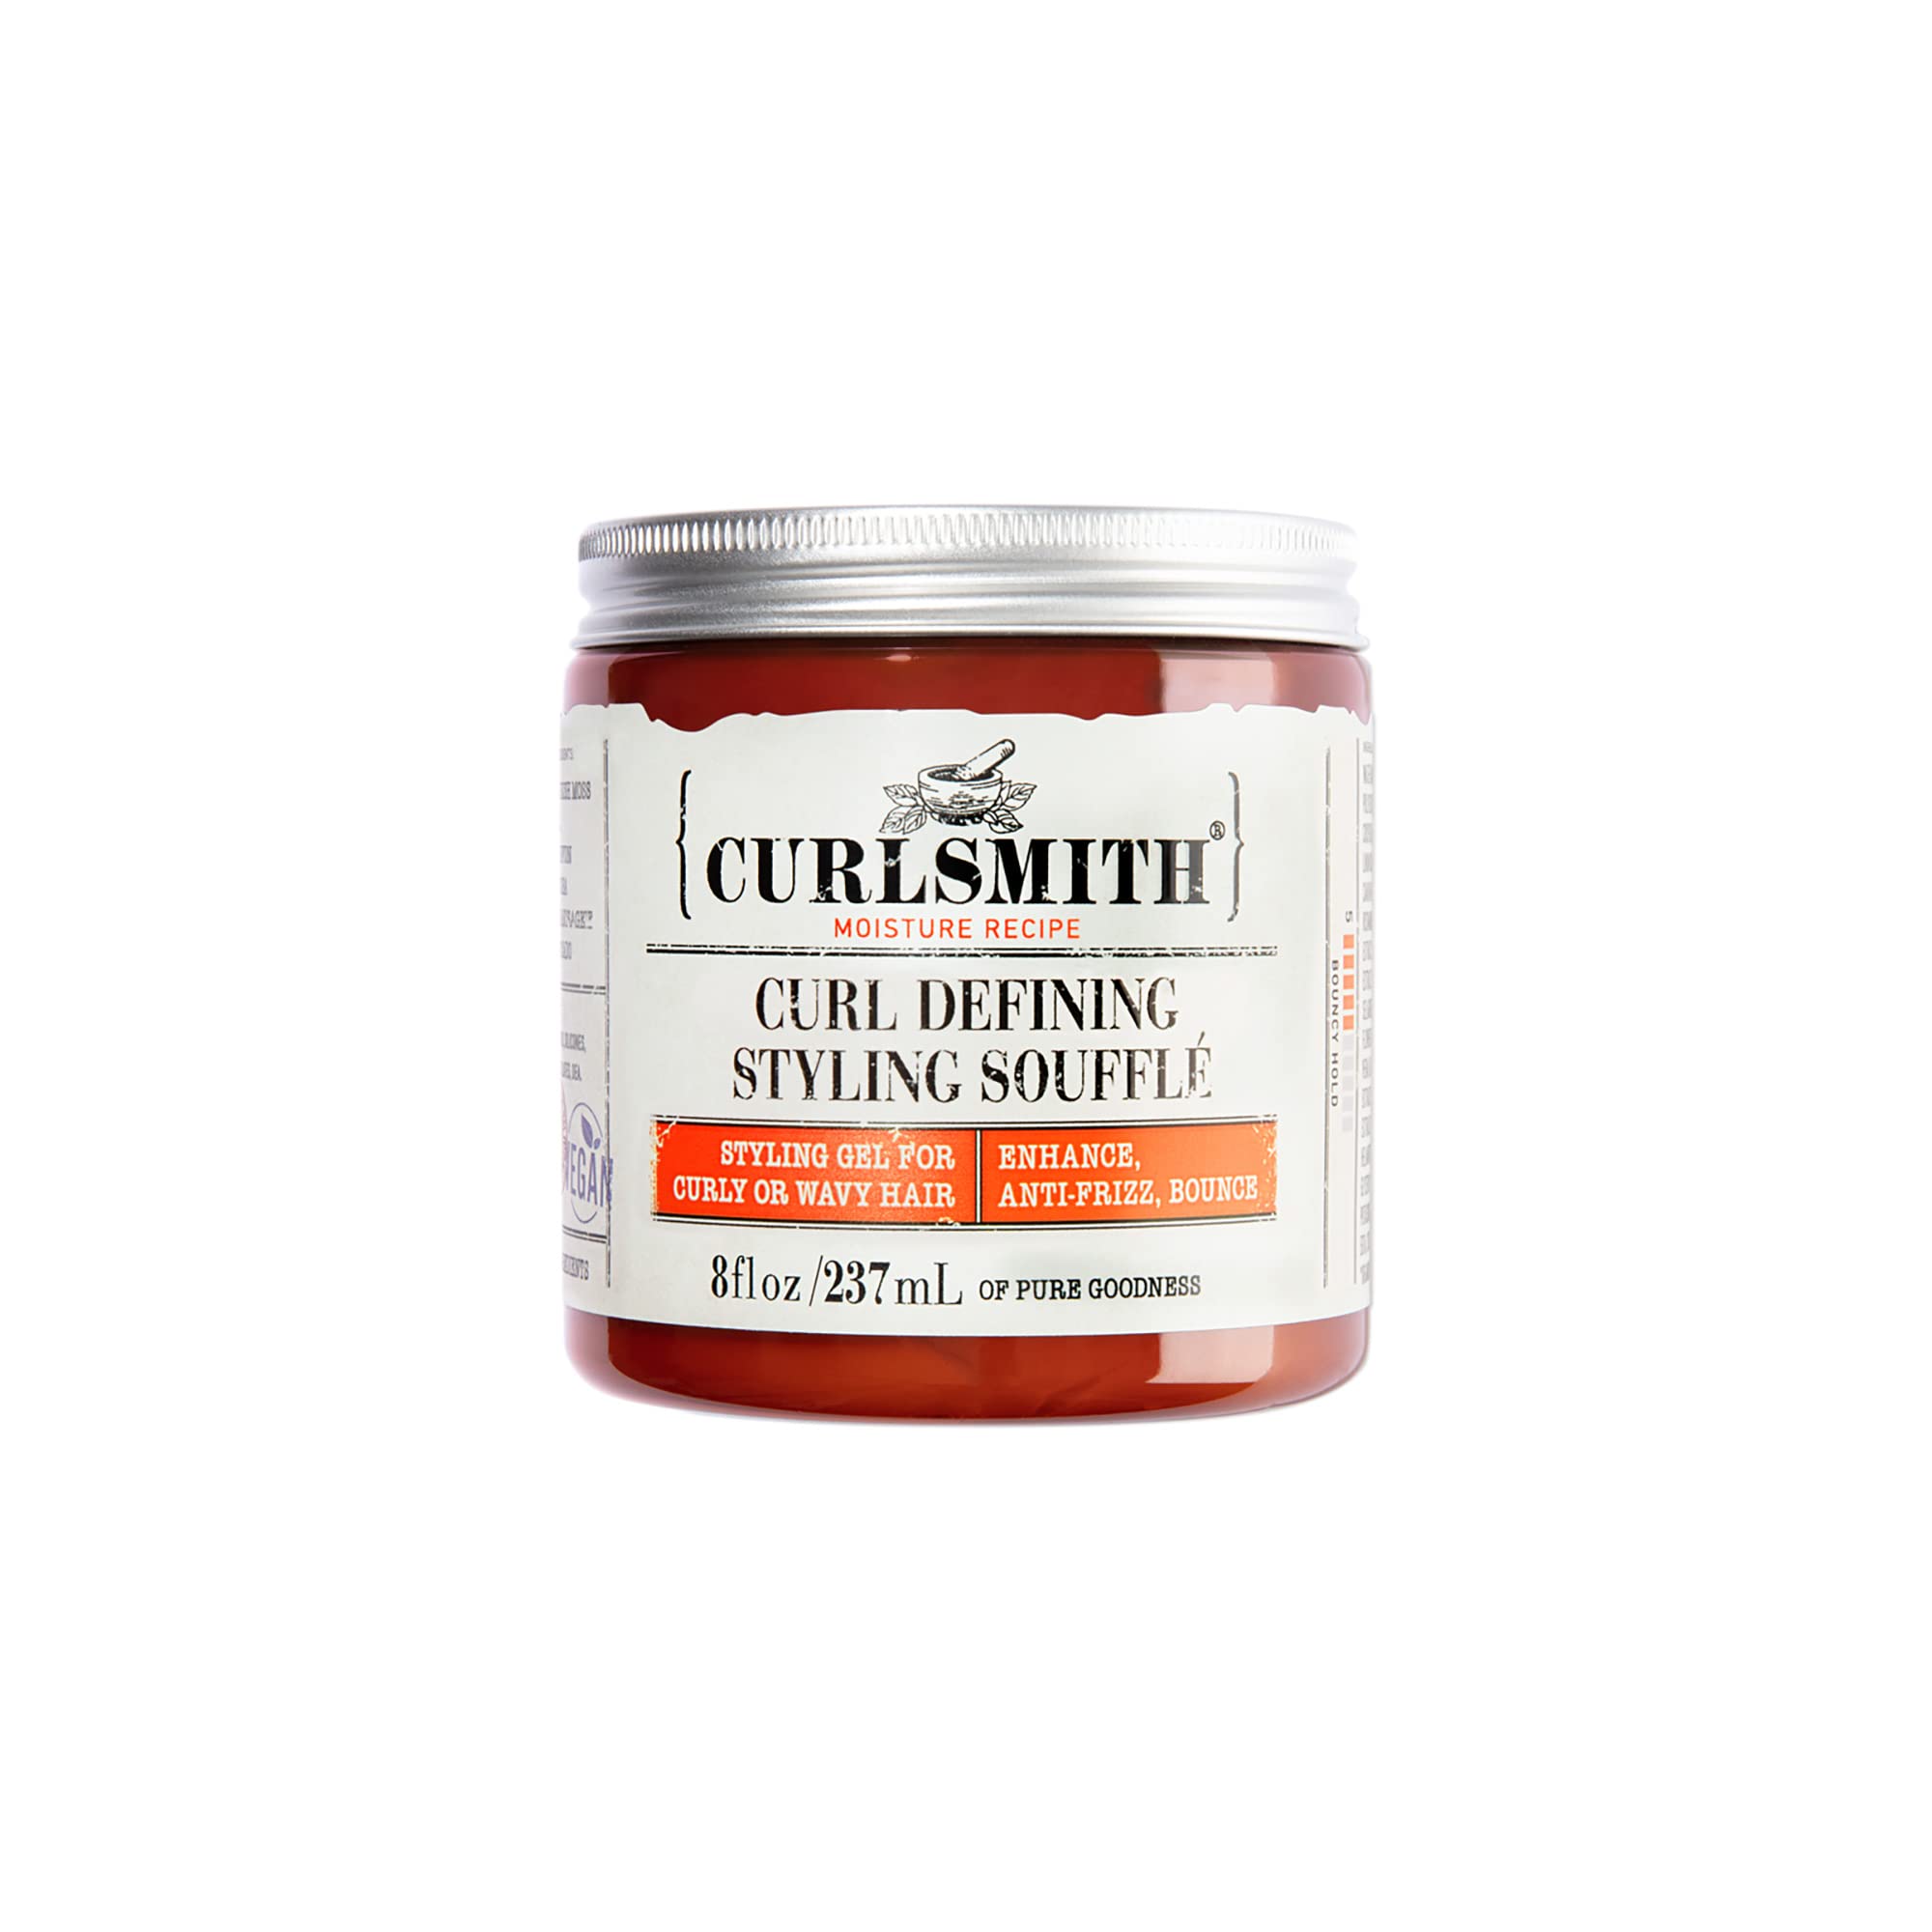 CURLSMITH - Curl Defining Styling Soufflé - Vegan Medium Hold Styling Gel for Wavy, Curly and Coily Hair (8oz)